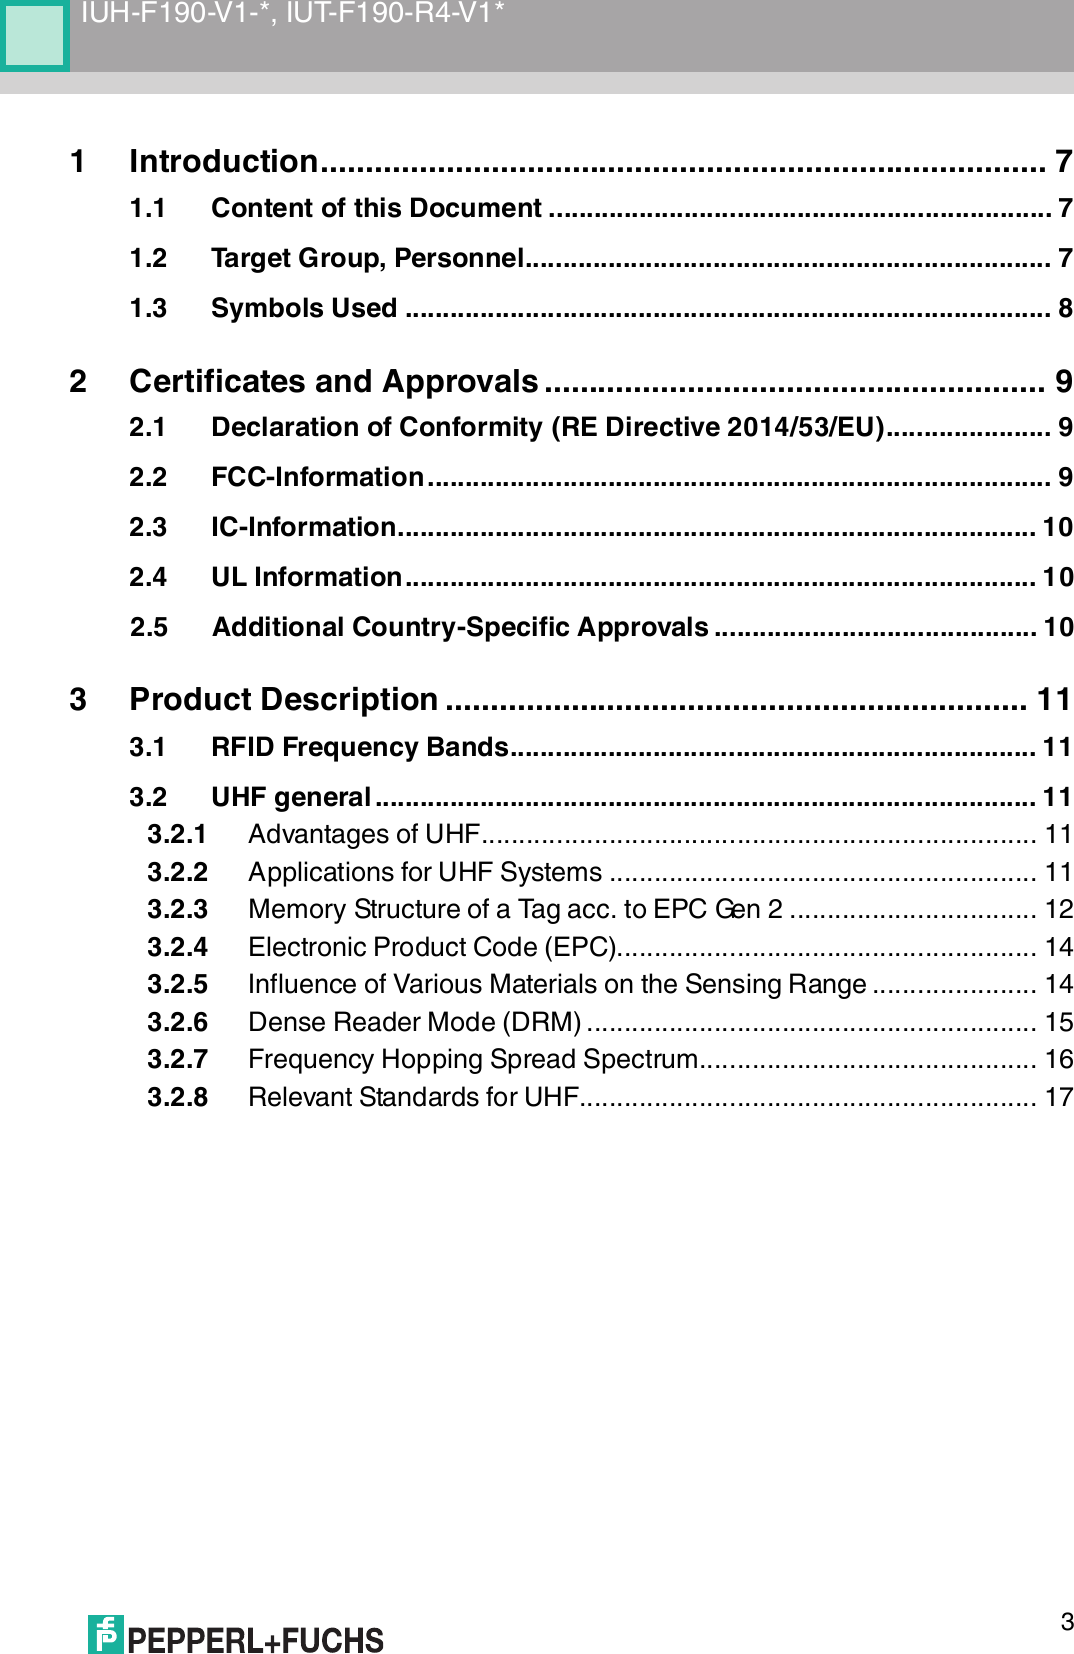 IUH-F190-V1-*, IUT-F190-R4-V1*31 Introduction................................................................................. 71.1 Content of this Document ................................................................... 71.2 Target Group, Personnel...................................................................... 71.3 Symbols Used ...................................................................................... 82 Certificates and Approvals ........................................................ 92.1 Declaration of Conformity (RE Directive 2014/53/EU)...................... 92.2 FCC-Information................................................................................... 92.3 IC-Information..................................................................................... 102.4 UL Information.................................................................................... 102.5 Additional Country-Specific Approvals ........................................... 103 Product Description ................................................................. 113.1 RFID Frequency Bands...................................................................... 113.2 UHF general ........................................................................................ 113.2.1 Advantages of UHF.......................................................................... 113.2.2 Applications for UHF Systems ......................................................... 113.2.3 Memory Structure of a Tag acc. to EPC Gen 2 ................................. 123.2.4 Electronic Product Code (EPC)........................................................ 143.2.5 Influence of Various Materials on the Sensing Range ...................... 143.2.6 Dense Reader Mode (DRM) ............................................................ 153.2.7 Frequency Hopping Spread Spectrum............................................. 163.2.8 Relevant Standards for UHF............................................................. 17